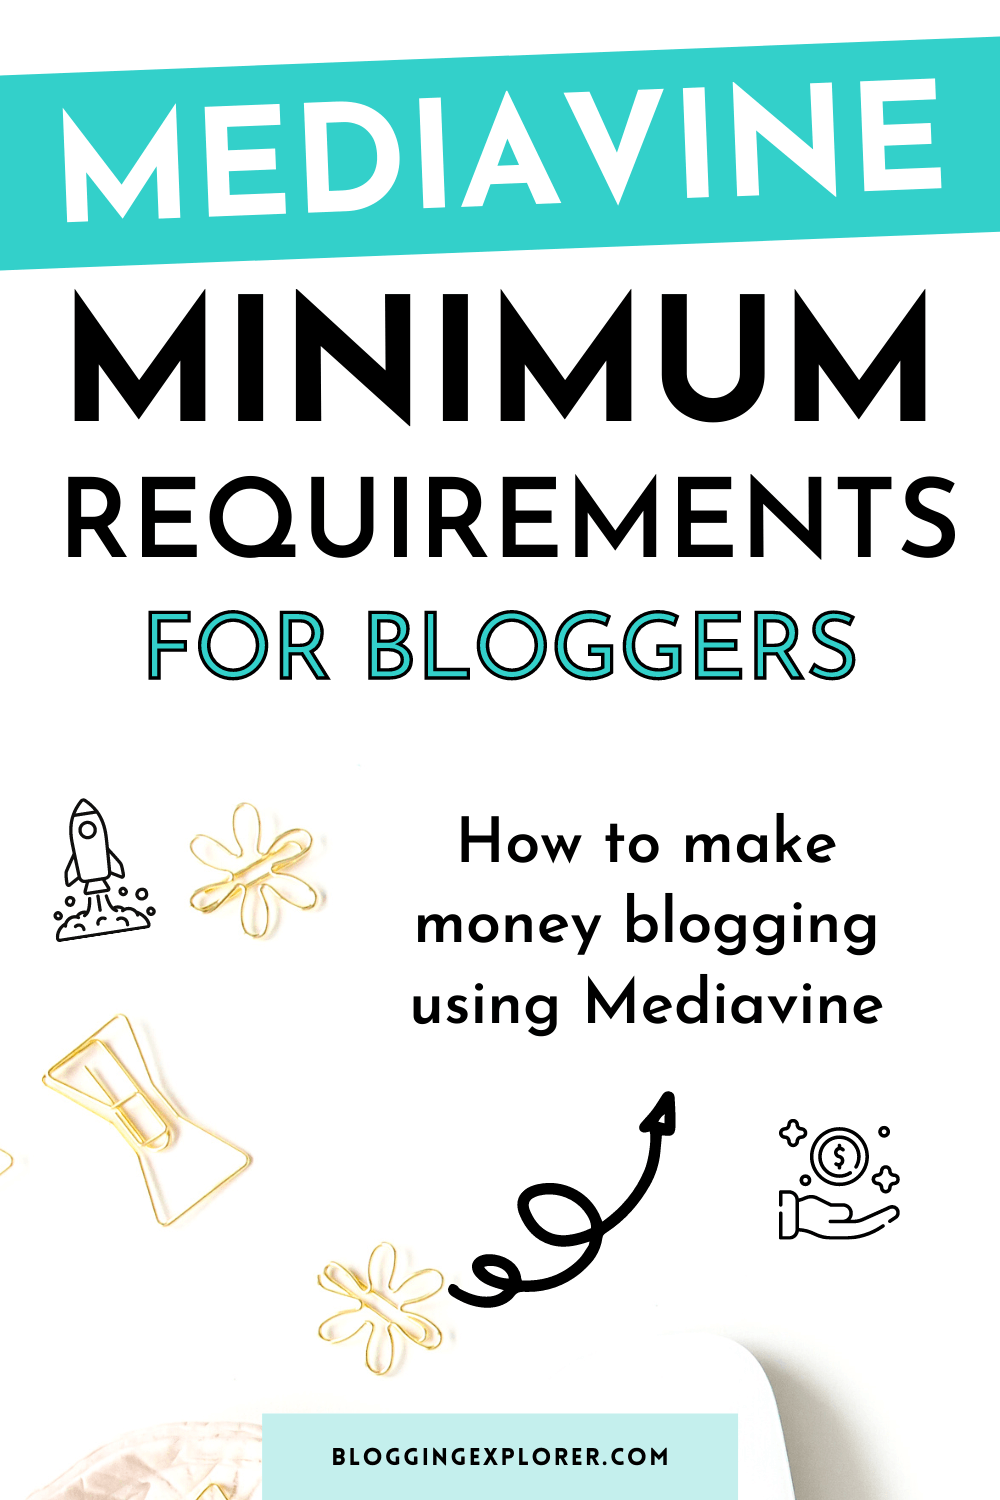 Mediavine requirements for publishers and bloggers